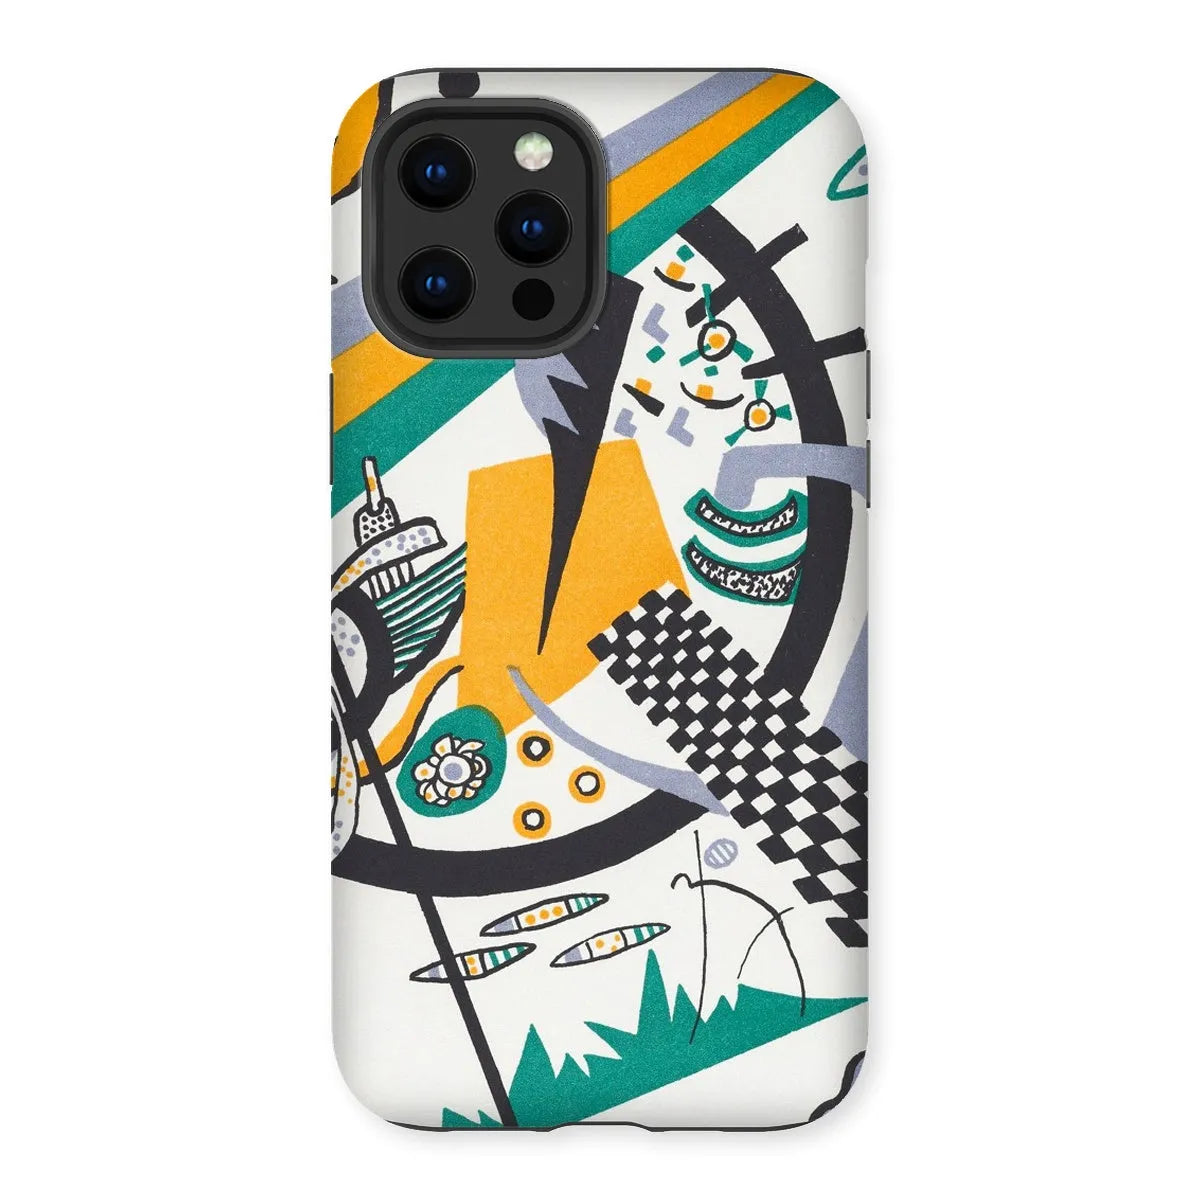 Small Worlds Iv - Expressionist Phone Case - Wassily Kandinsky - Iphone 12 Pro Max / Matte - Mobile Phone Cases